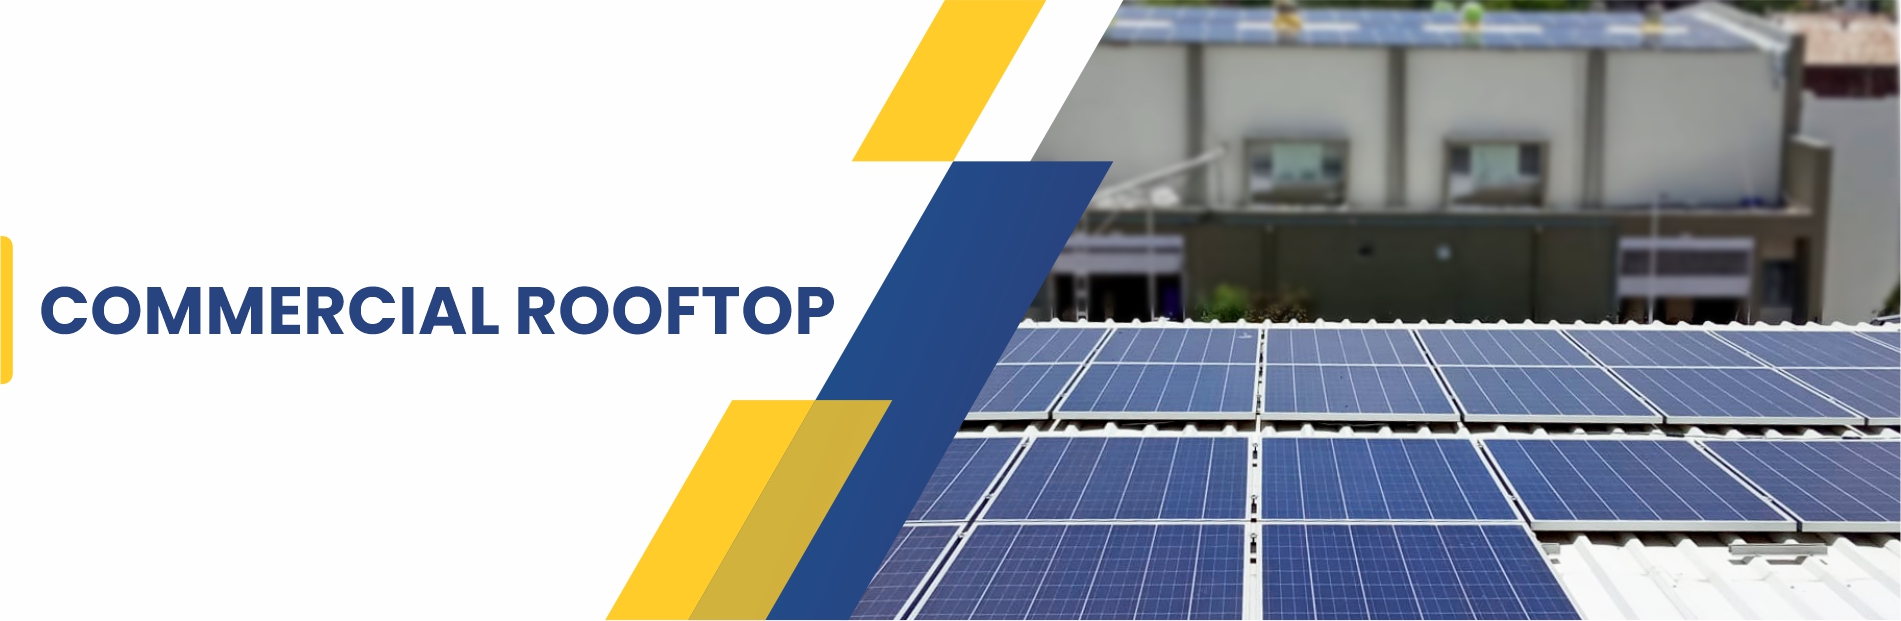 commercial rooftop solar systems